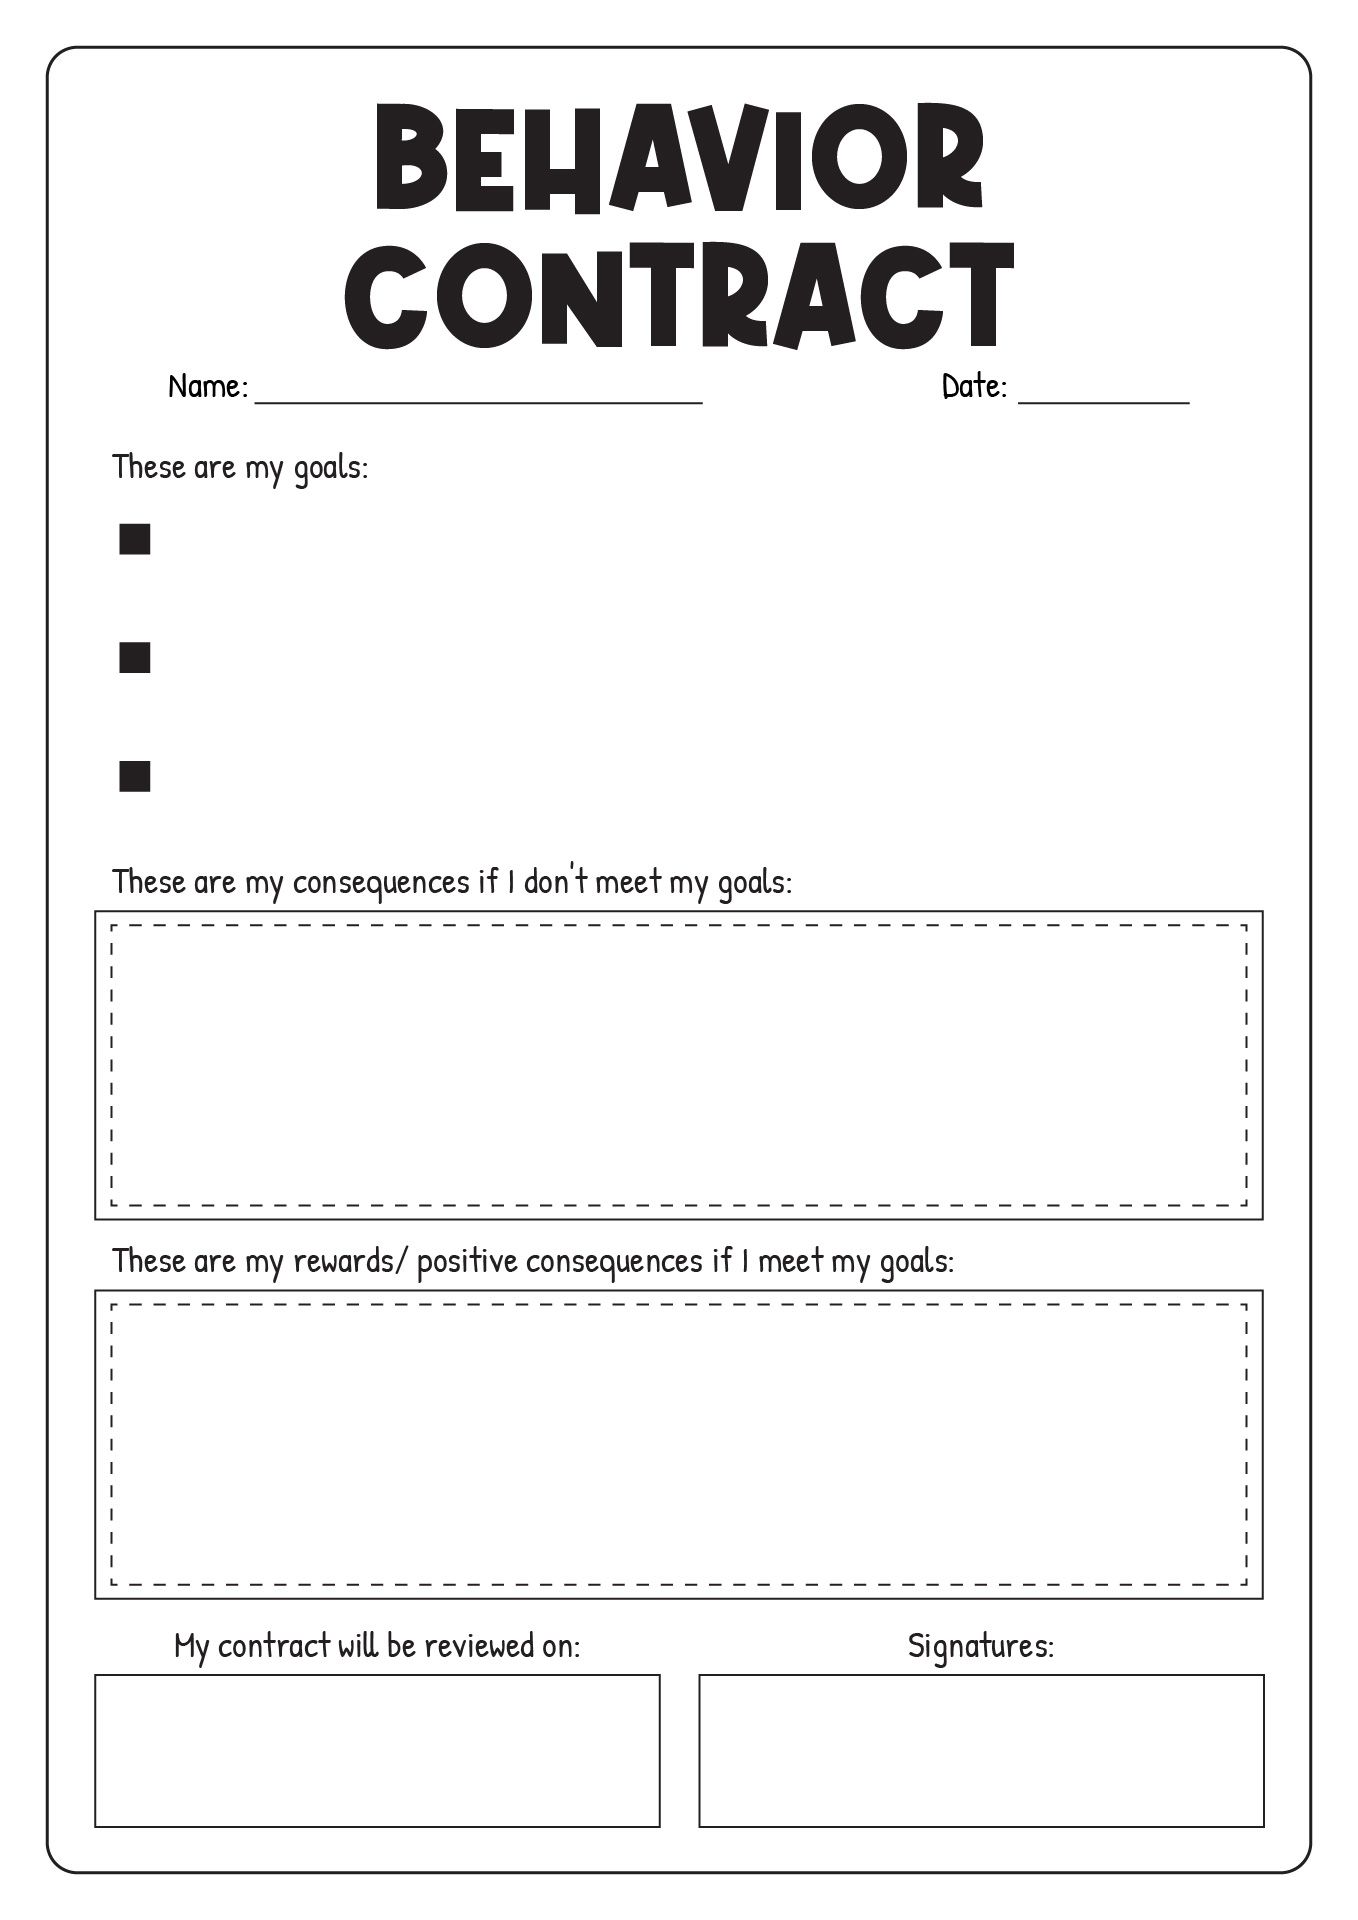 Elementary Student Behavior Contract Template Image